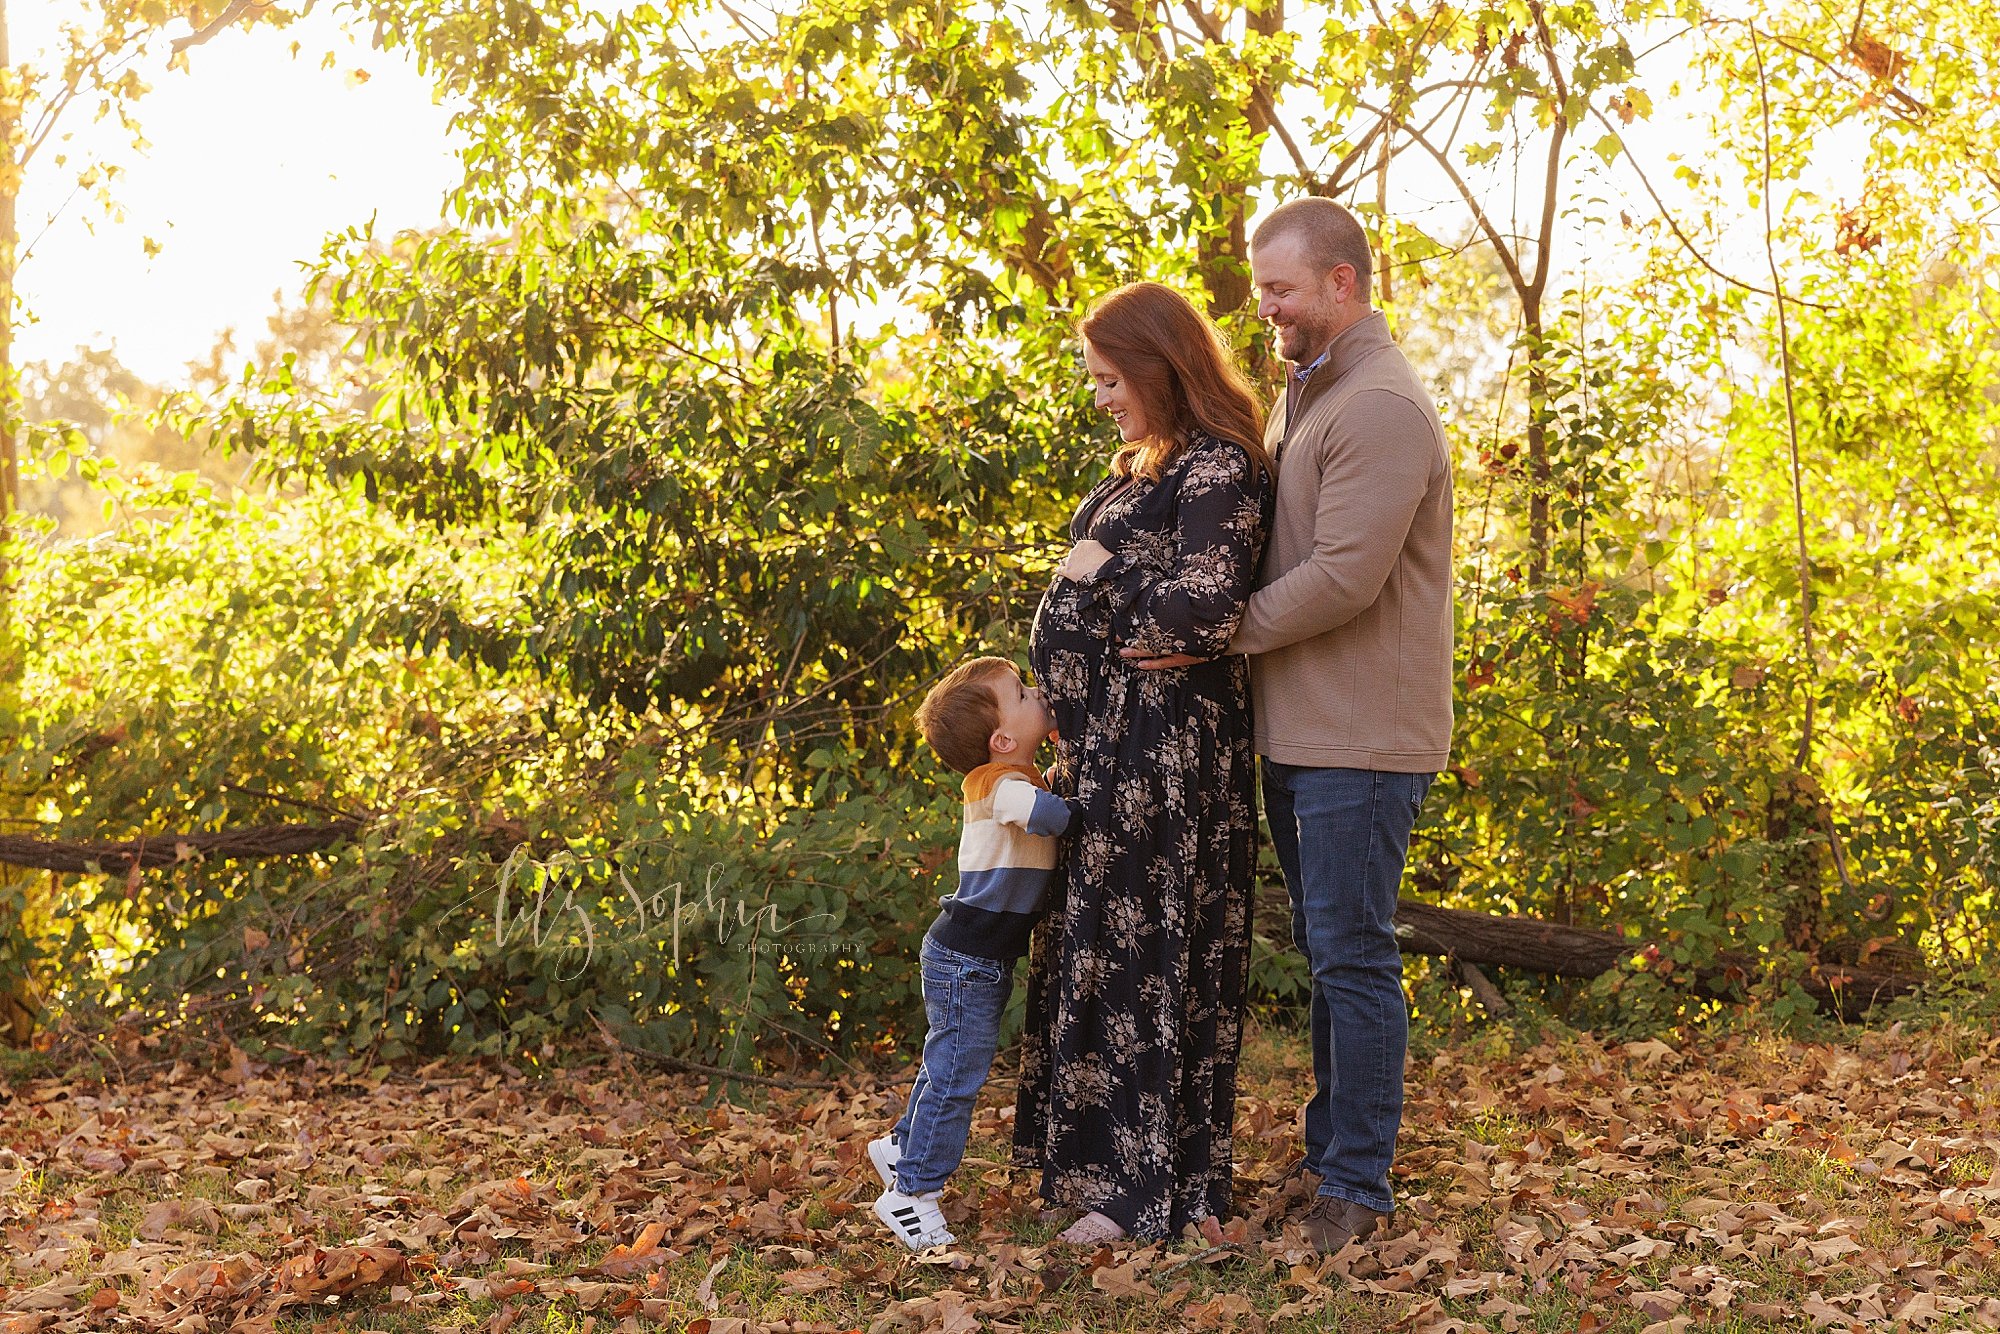 intown-atlanta-decatur-brookhaven-buckhead-outdoor-fall-pictures-family-maternity-photoshoot_5572.jpg